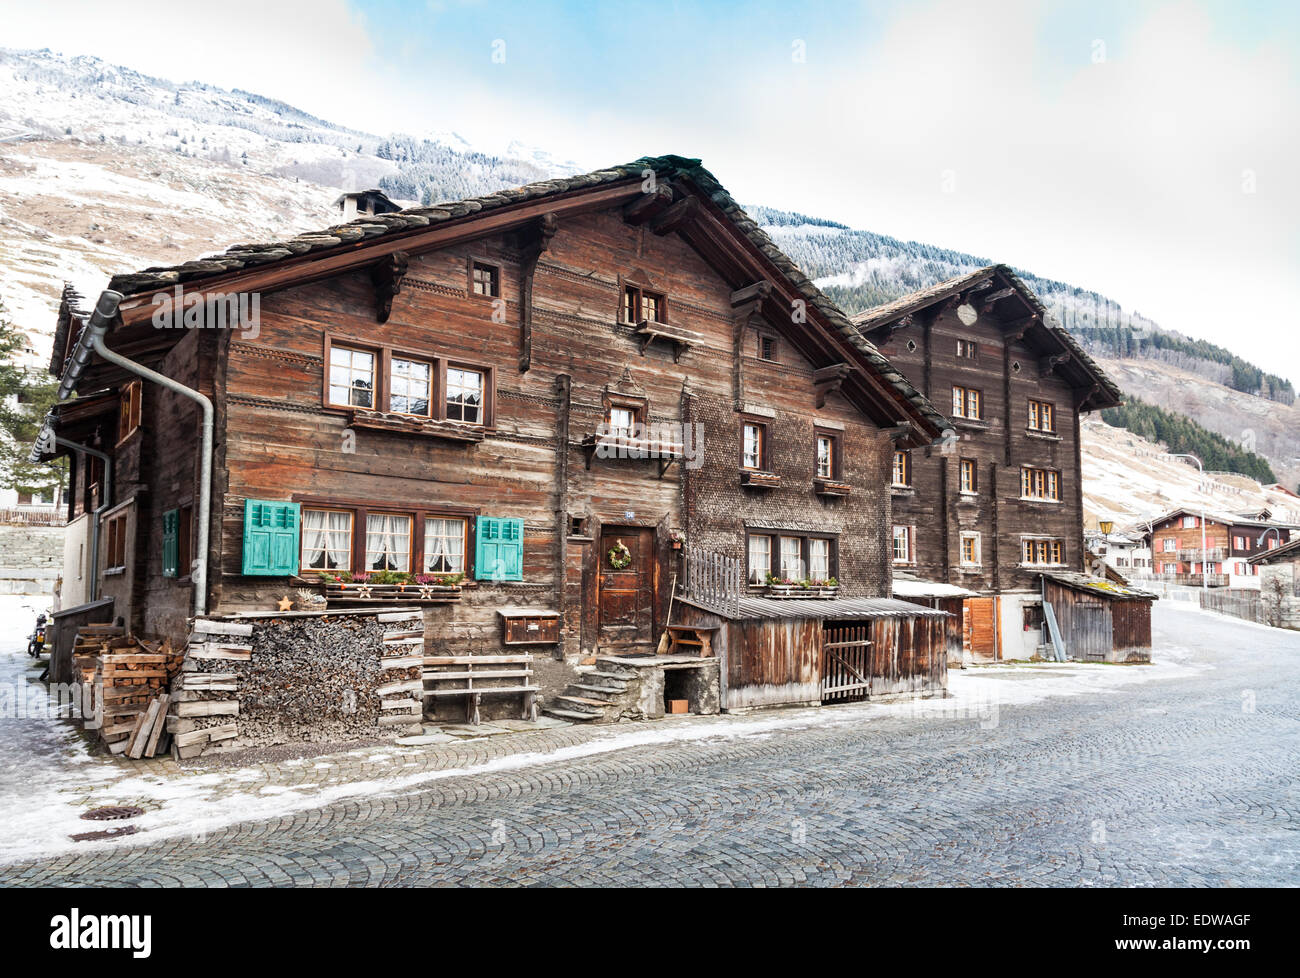 Traditional wooden houses in vals, switzerland Stock Photo